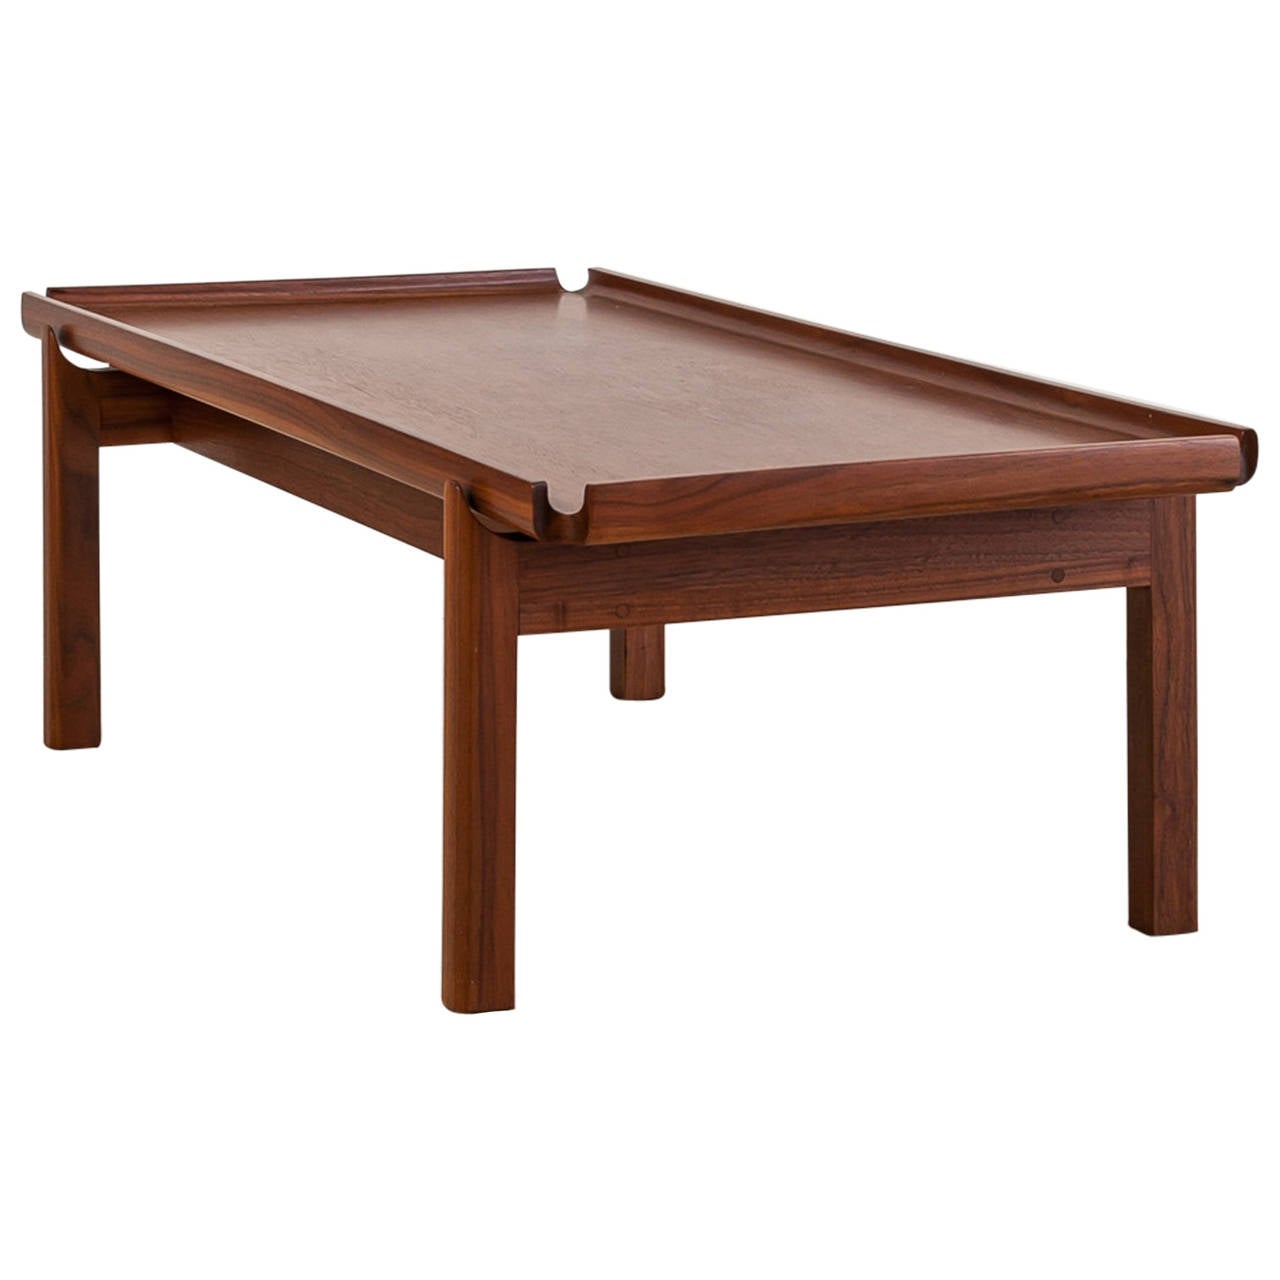 A low, rectangular coffee table with edges that curve upwards.
The table is branded with 'John A. Kapel, designer' and is in an excellent condition.
From the 1950s on, Kapel designed for furniture companies Glenn of California and Brown and